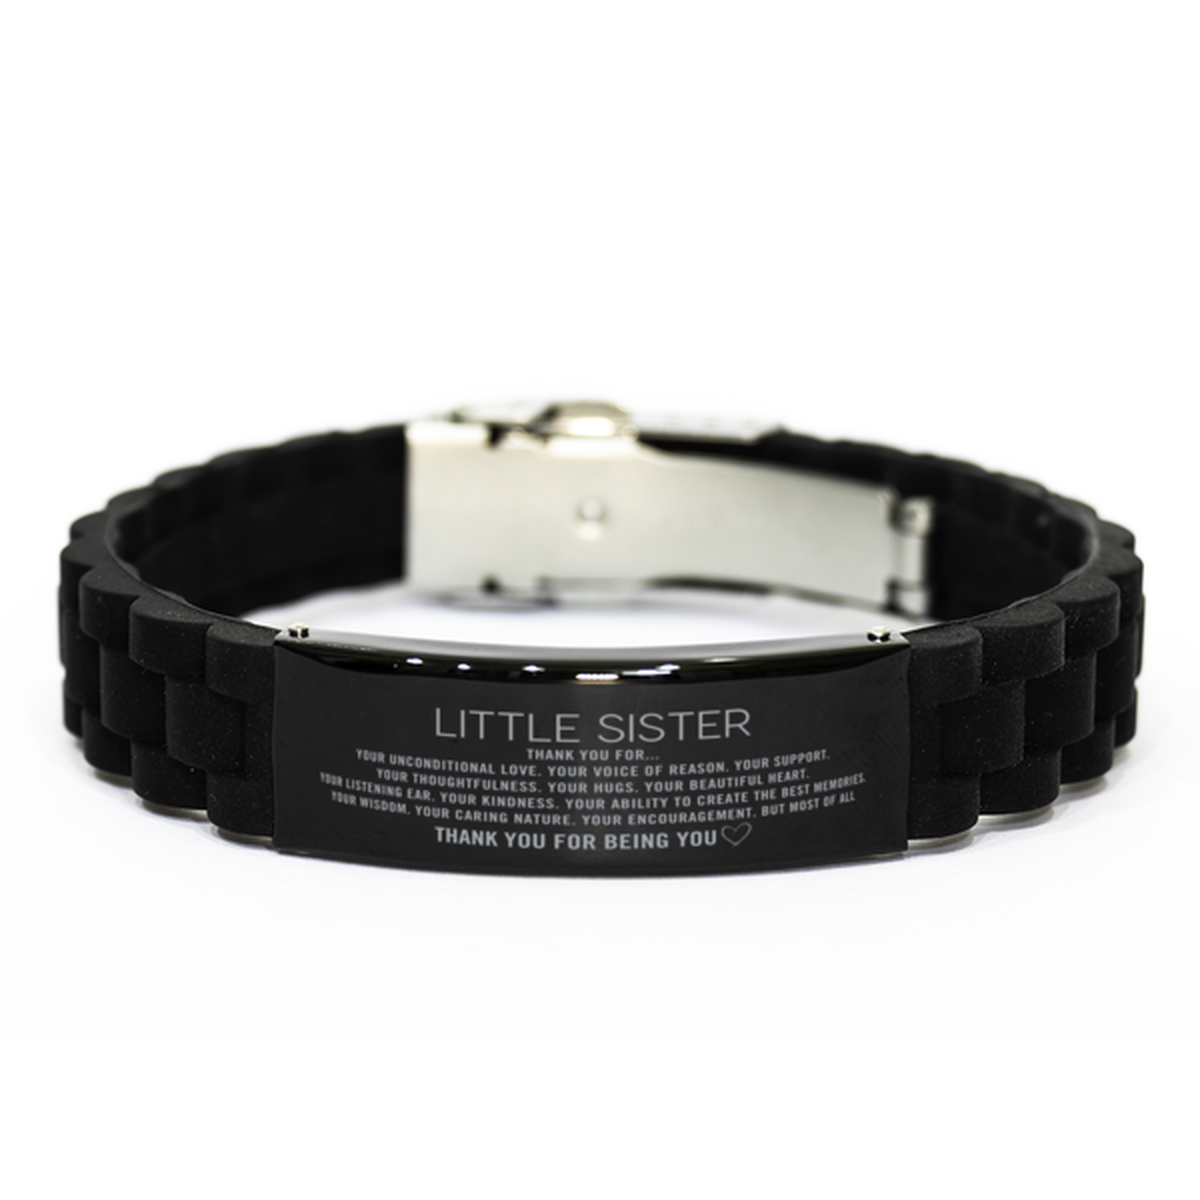 Little Sister Black Glidelock Clasp Bracelet Custom, Engraved Gifts For Little Sister Christmas Graduation Birthday Gifts for Men Women Little Sister Thank you for Your unconditional love